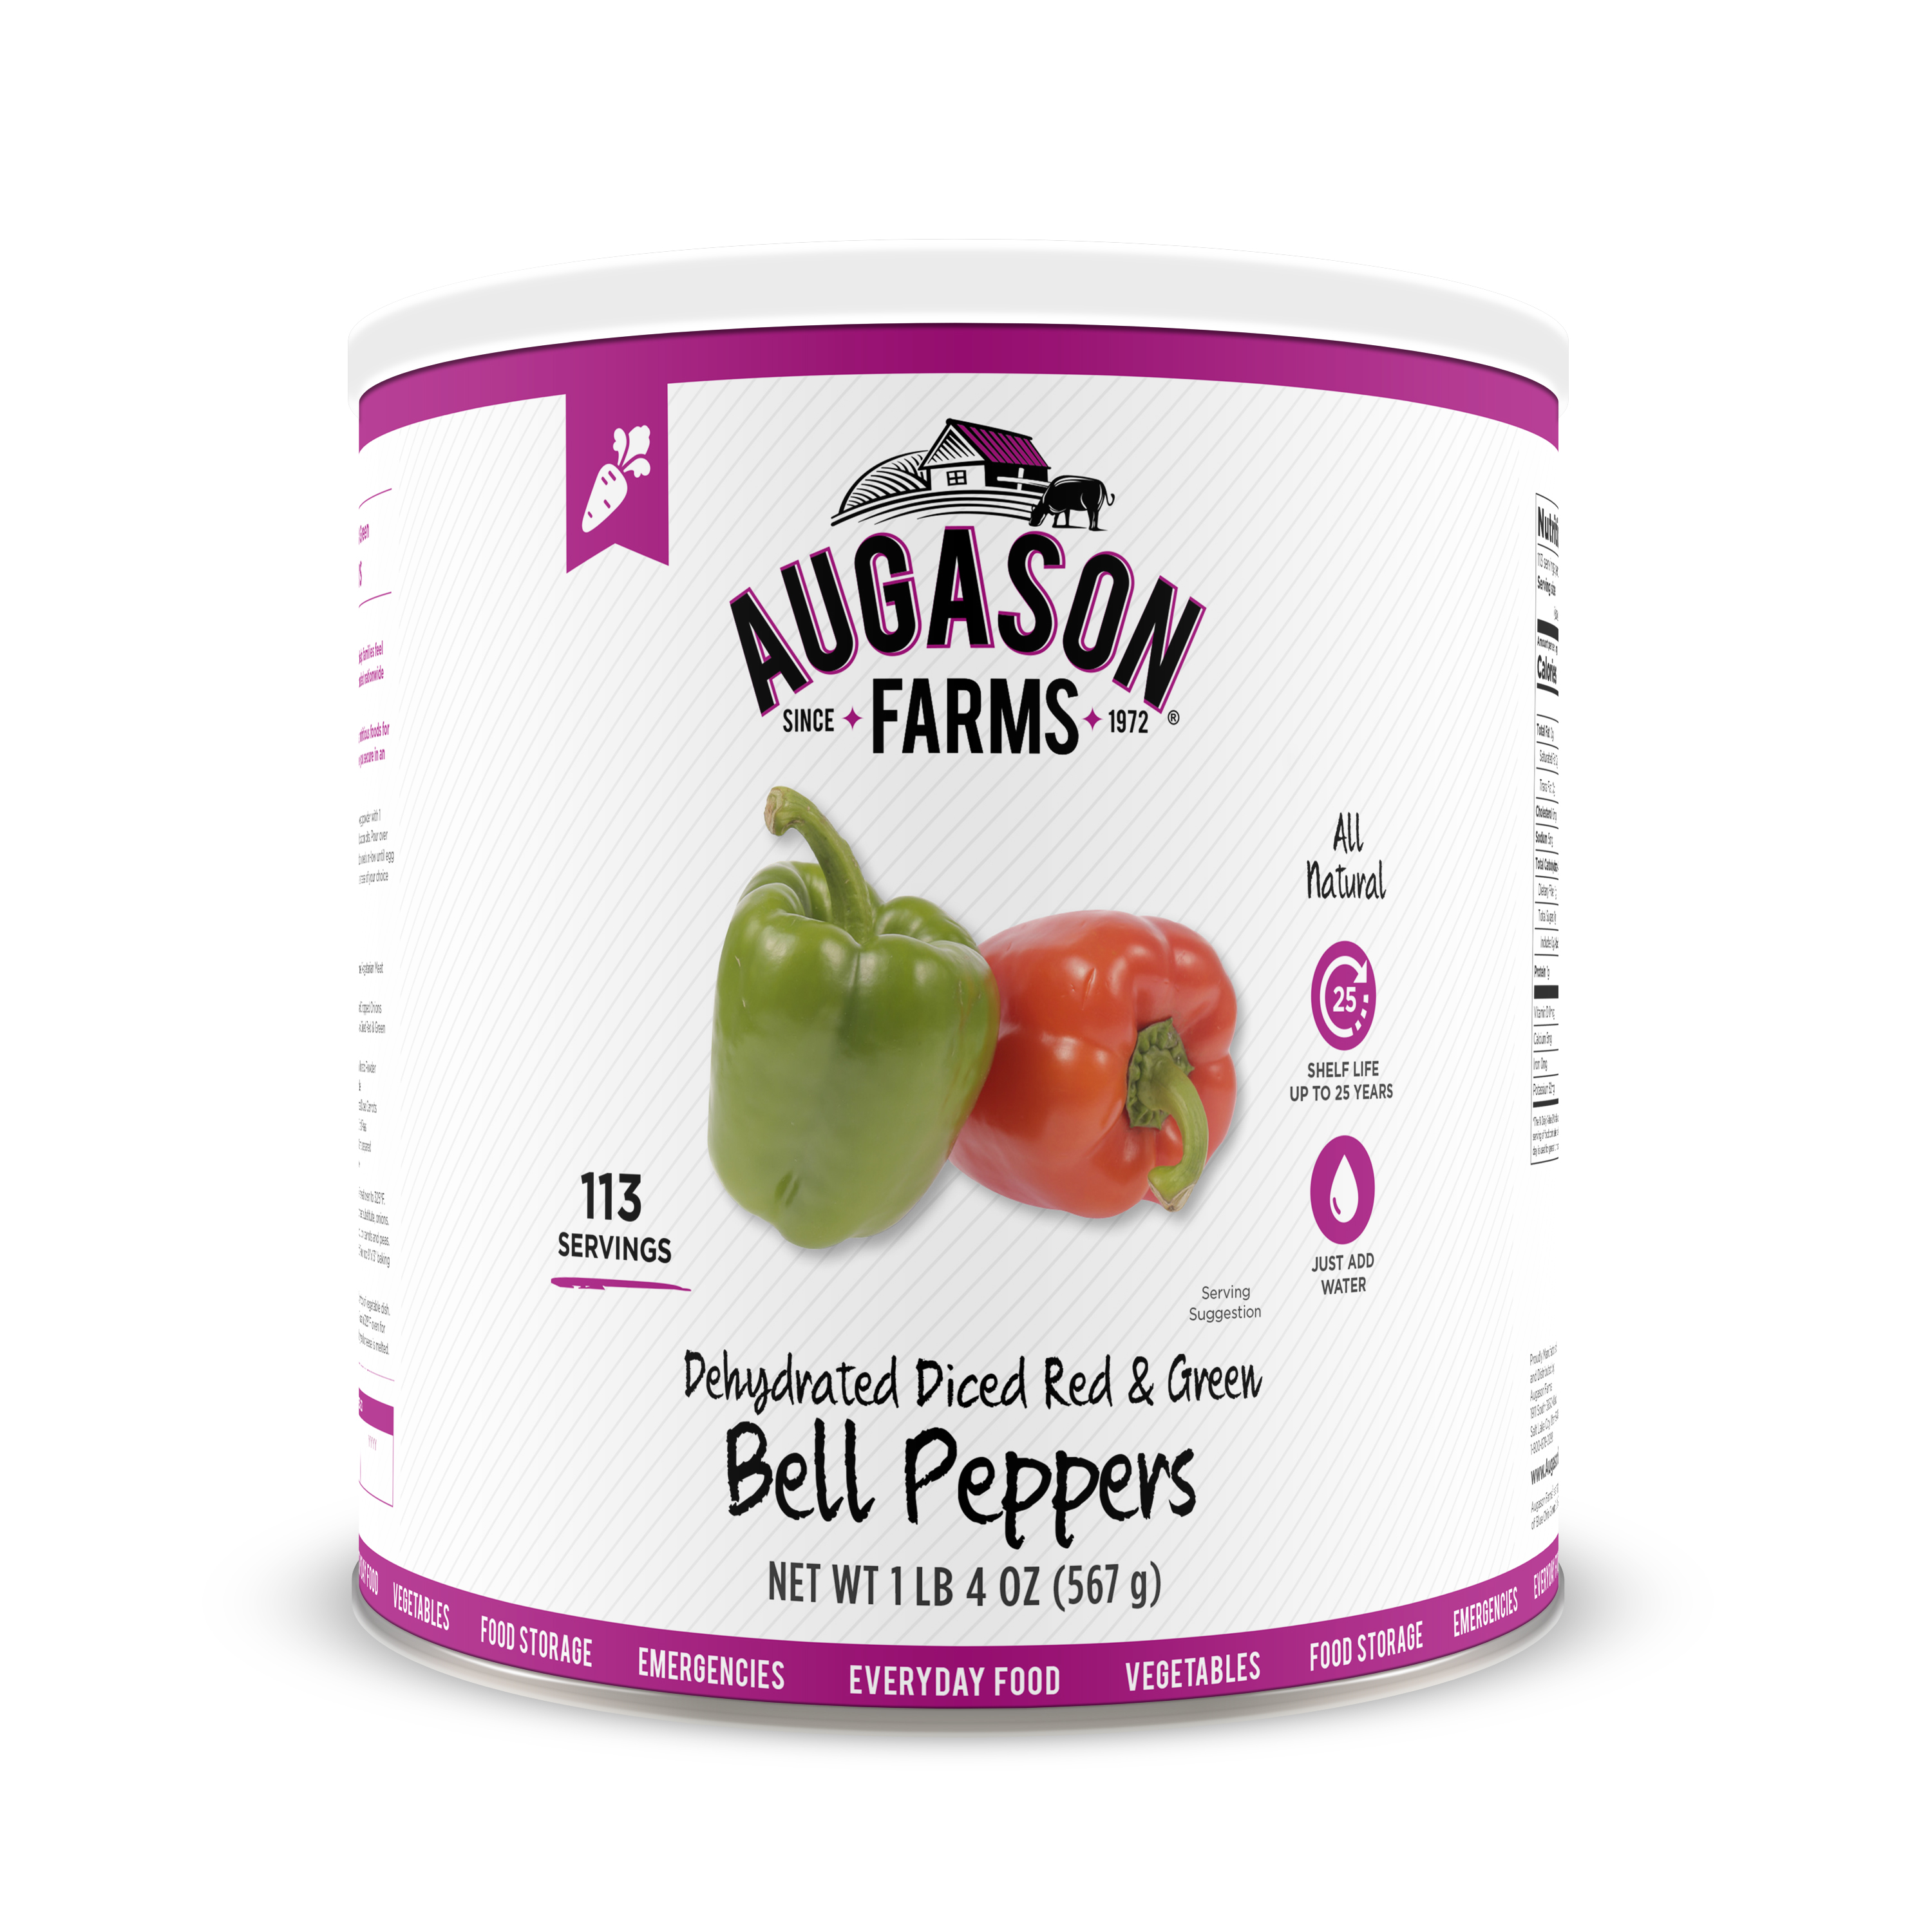 Augason Farms Dehydrated Diced Red & Green Bell Peppers 1 lb 4 oz No. 10 Can - image 1 of 7